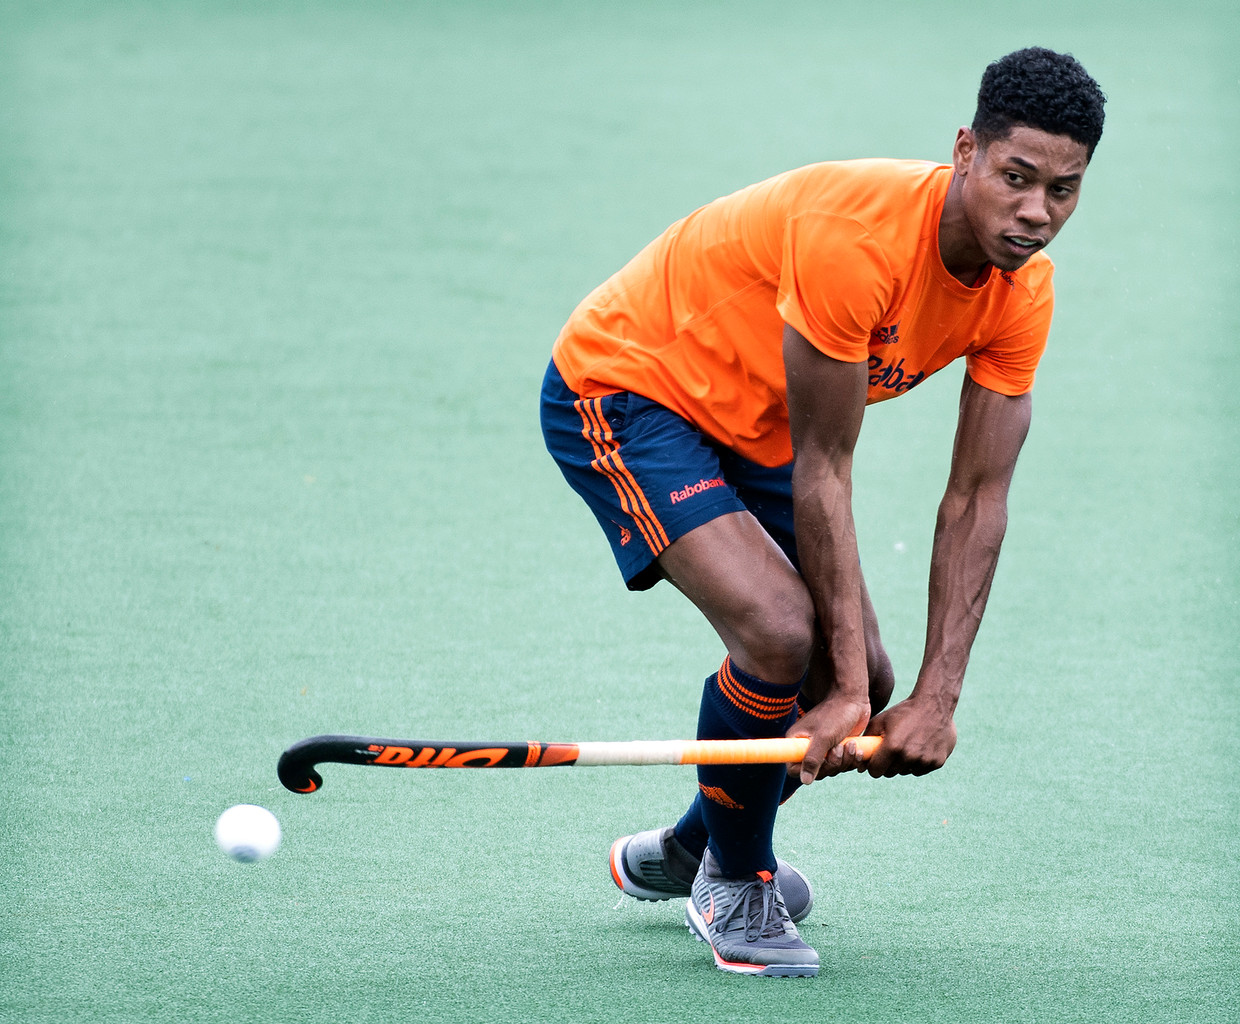 1240?appId=93a17a8fd81db0de025c8abd1cca1279&quality=0 - Terrance Pieters on racism in hockey: 'It's done now, I dare to confront' - As the first hockey player of color in the Dutch team, Terrance Pieters breaks the silence about racism in his sport. On Tuesday he also tells his teammates in the Wagener Stadium about the pain of hurtful words and jokes.